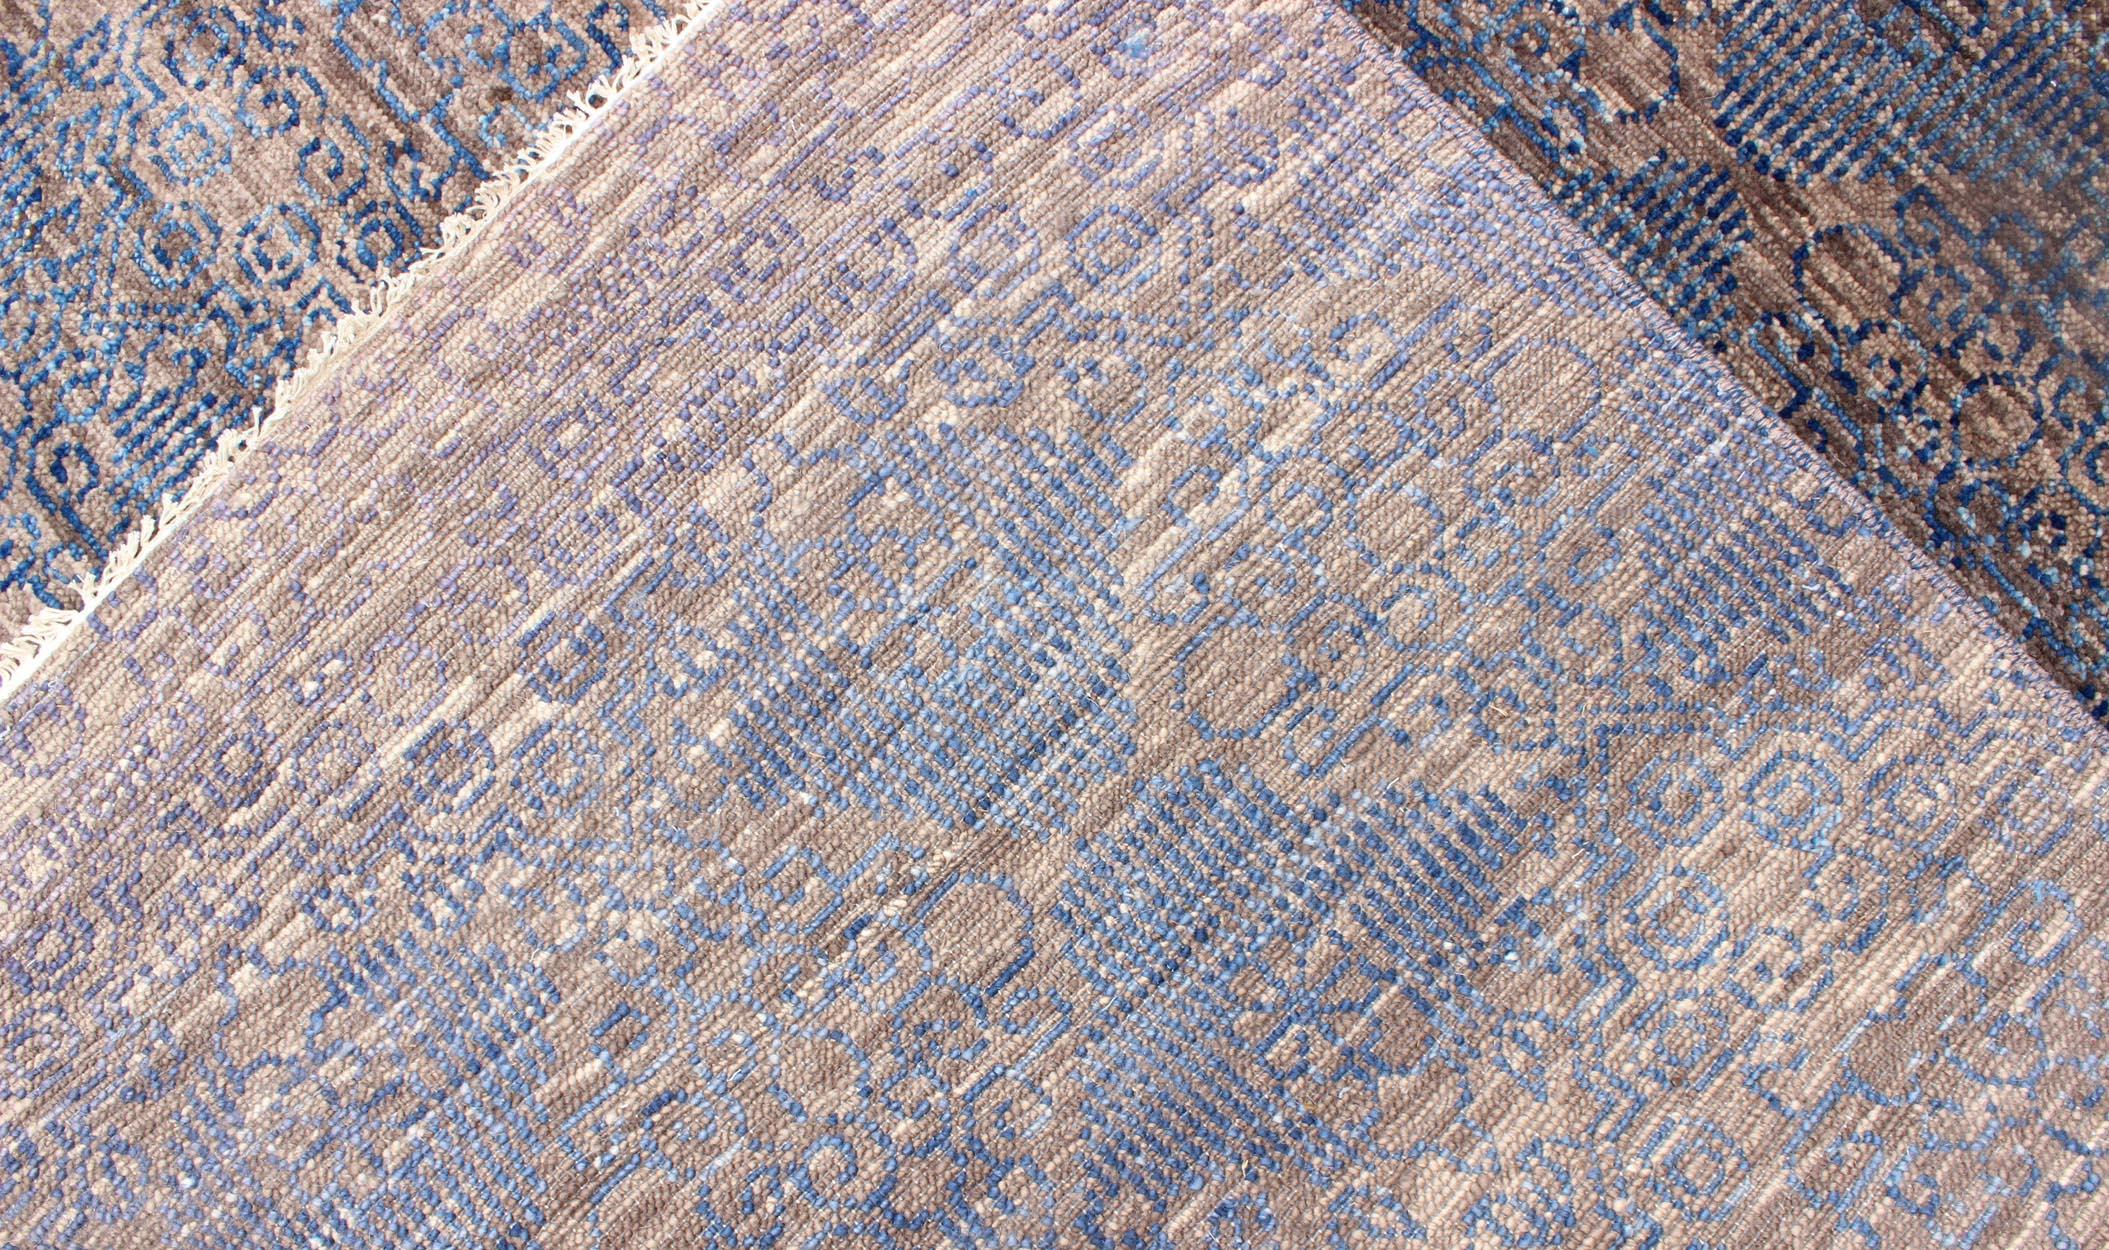 All-Over Transitional Rug in Shades of Blue and Brown In Excellent Condition For Sale In Atlanta, GA